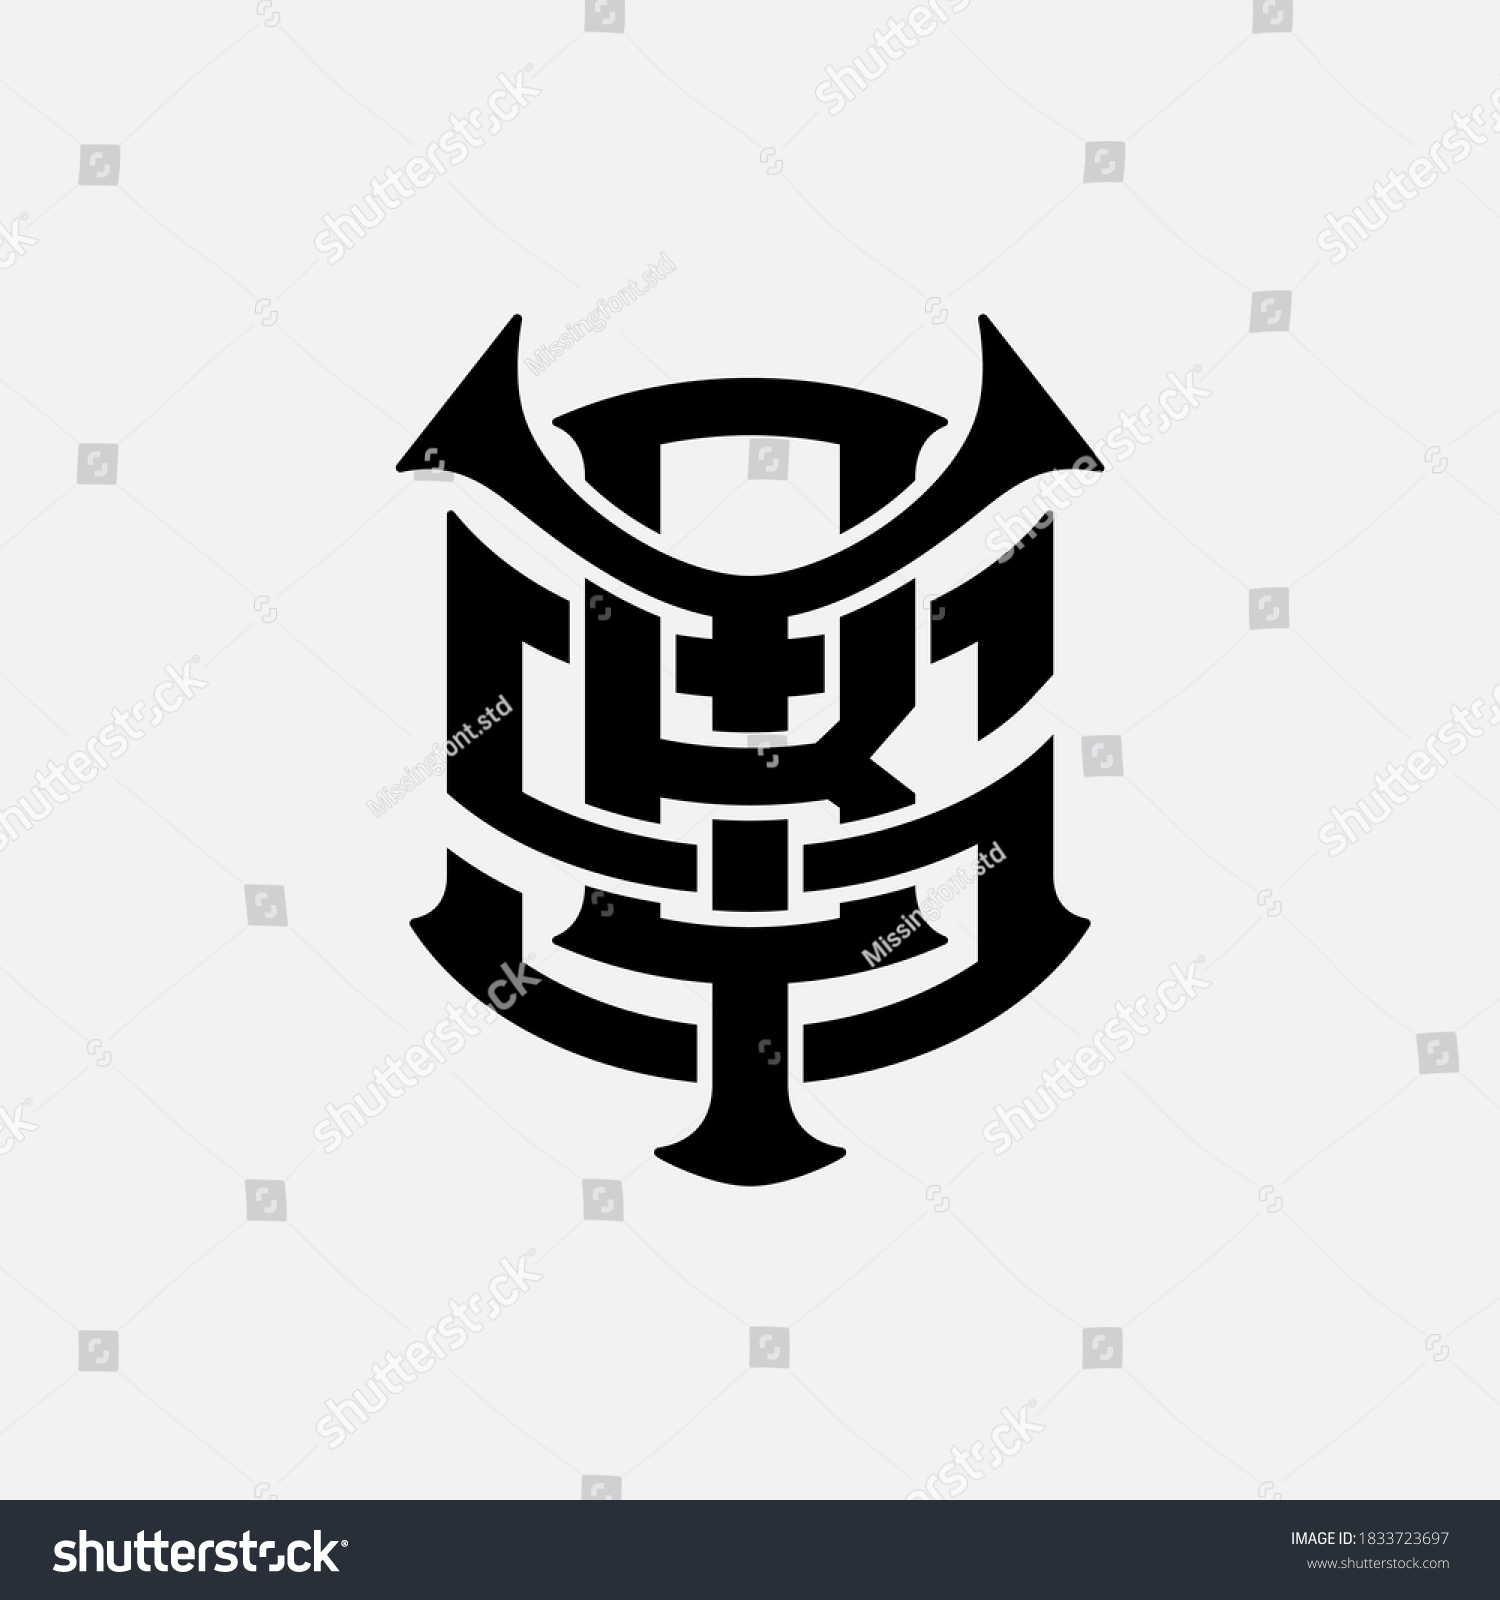 SVG of Initial letter Y, B, S, YBS, YSB, BSY, BYS, SYB or SBY overlapping, interlock, monogram logo, black color on white background svg